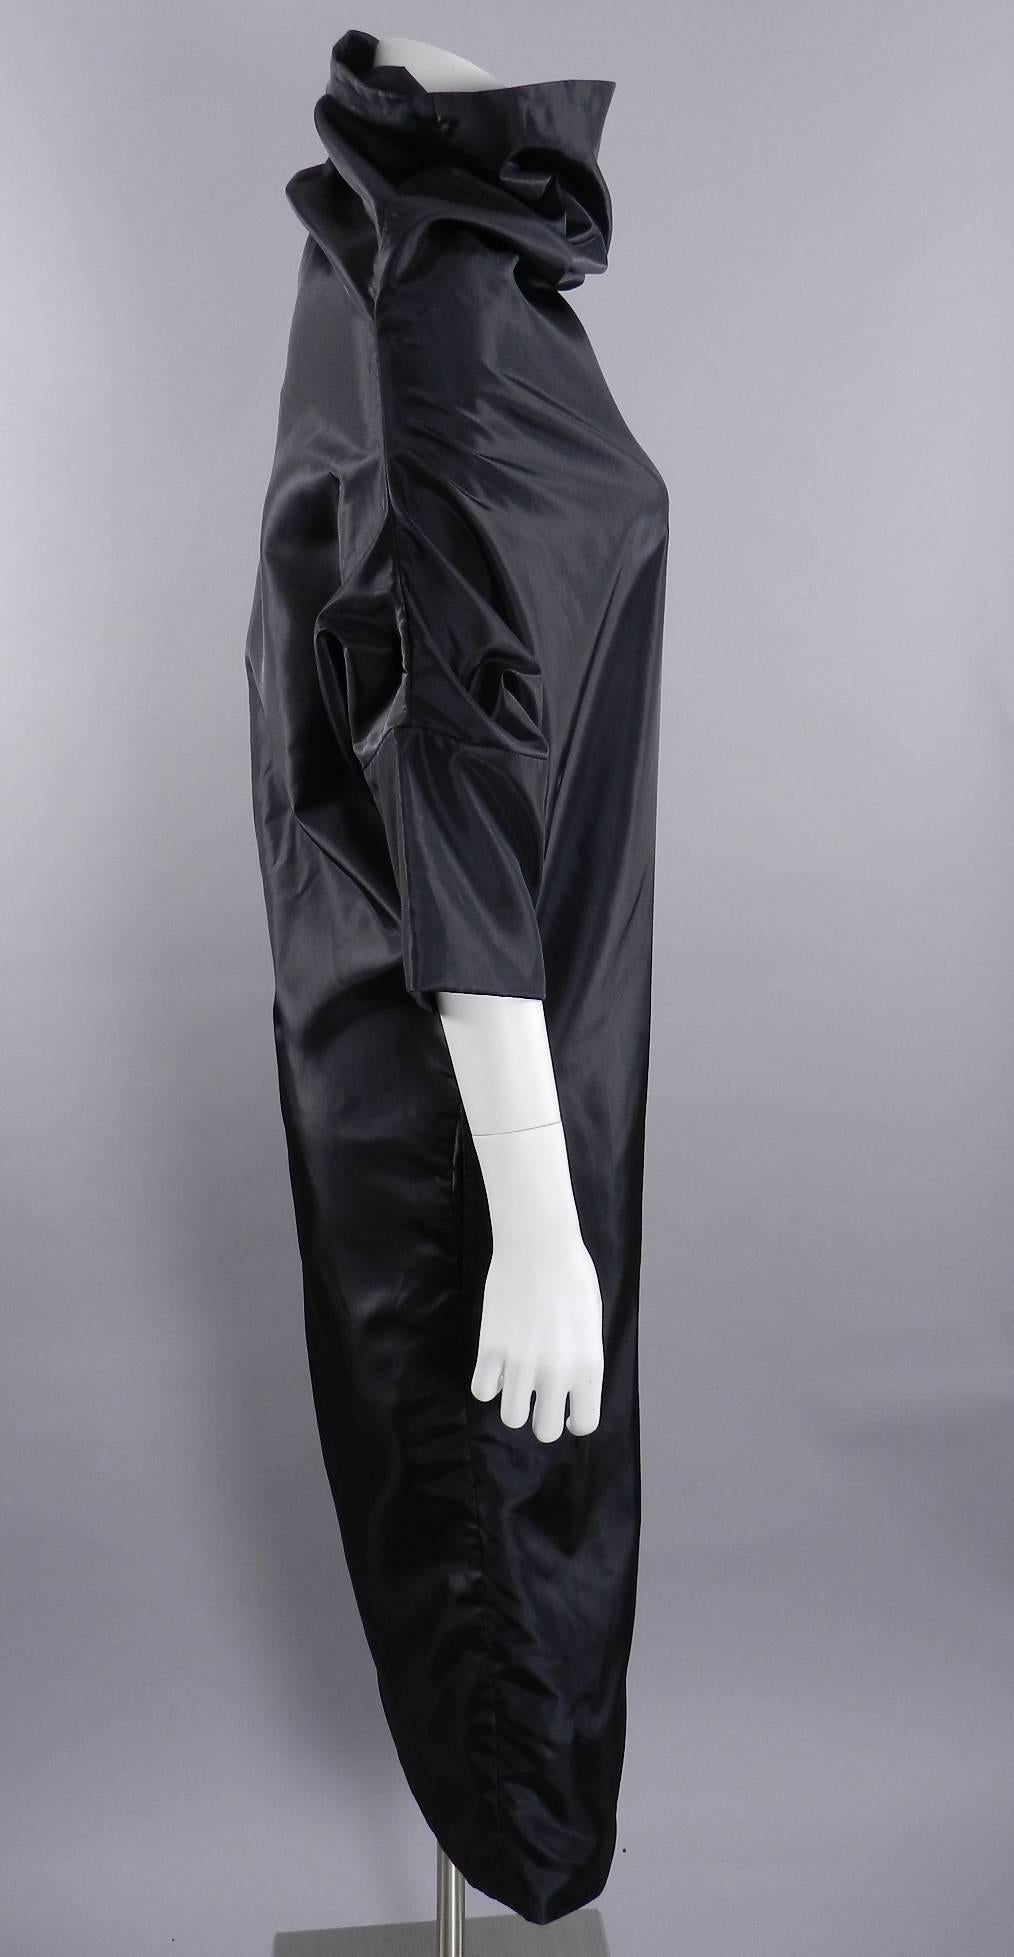 Vintage 1980's Comme des Garcons avant garde black dress. Pull-over style with no zippers or closures. Funnel neck design with half sleeves, 1 side hidden pocket, and raised hem on one side. Excellent clean condition. Tagged size S - best for USA 6.